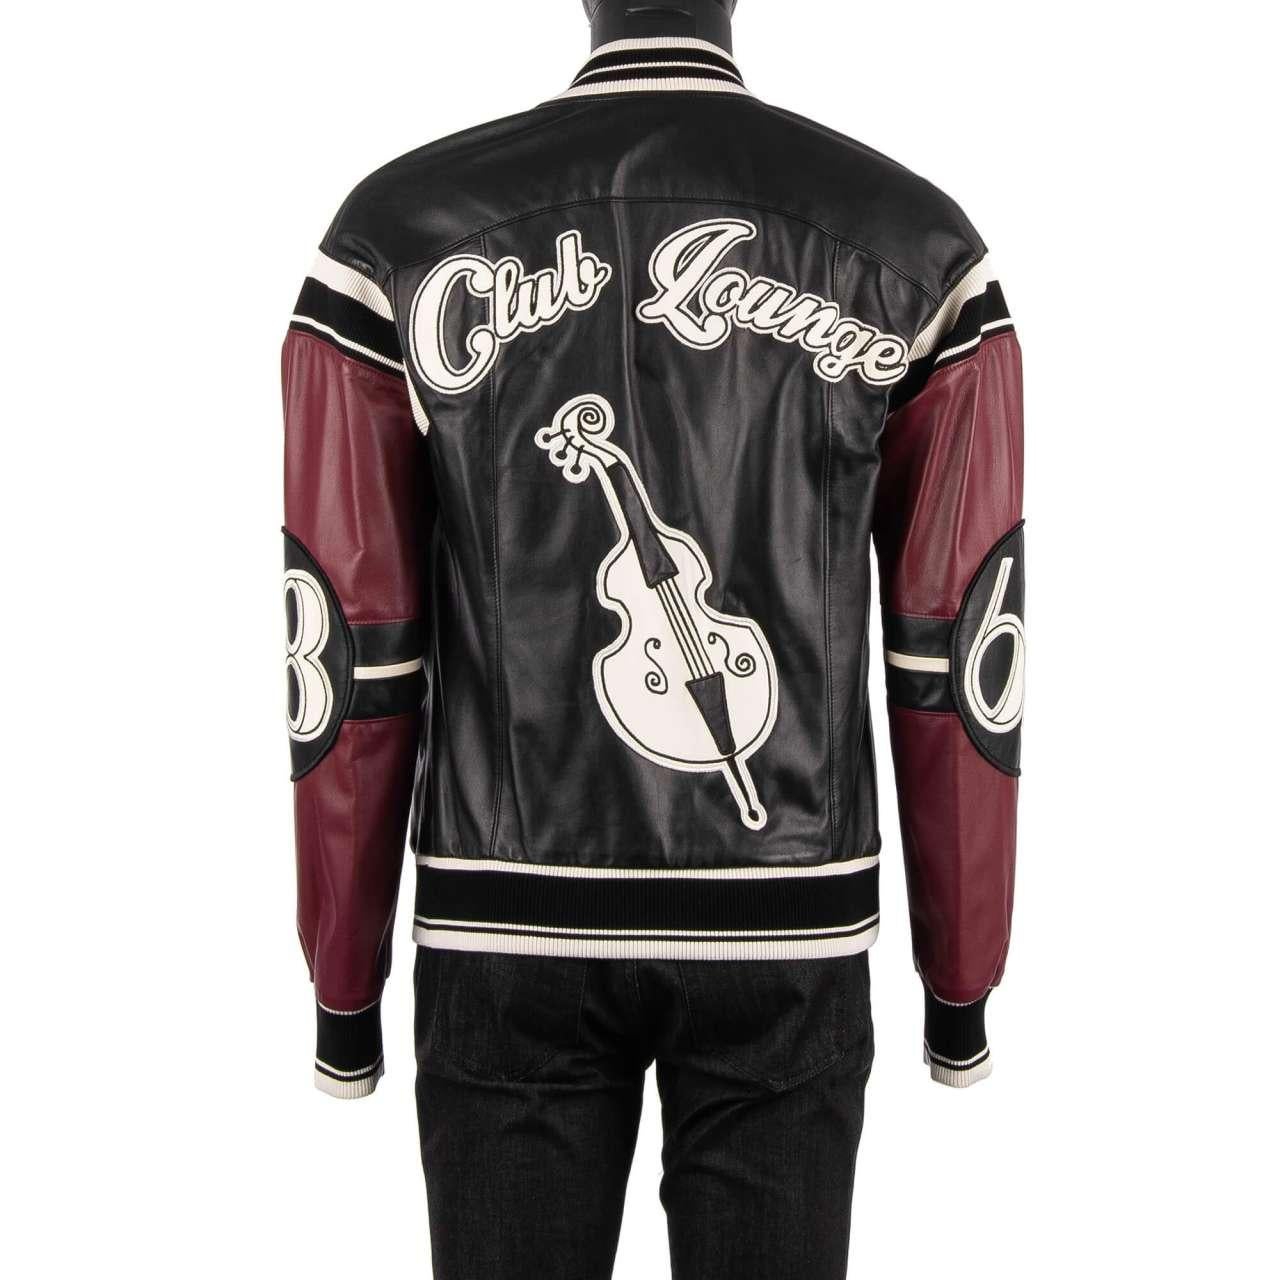 D&G Club Lounge Cello Embroidered Bomber Leather Jacket Black Bordeaux 46 In Excellent Condition For Sale In Erkrath, DE